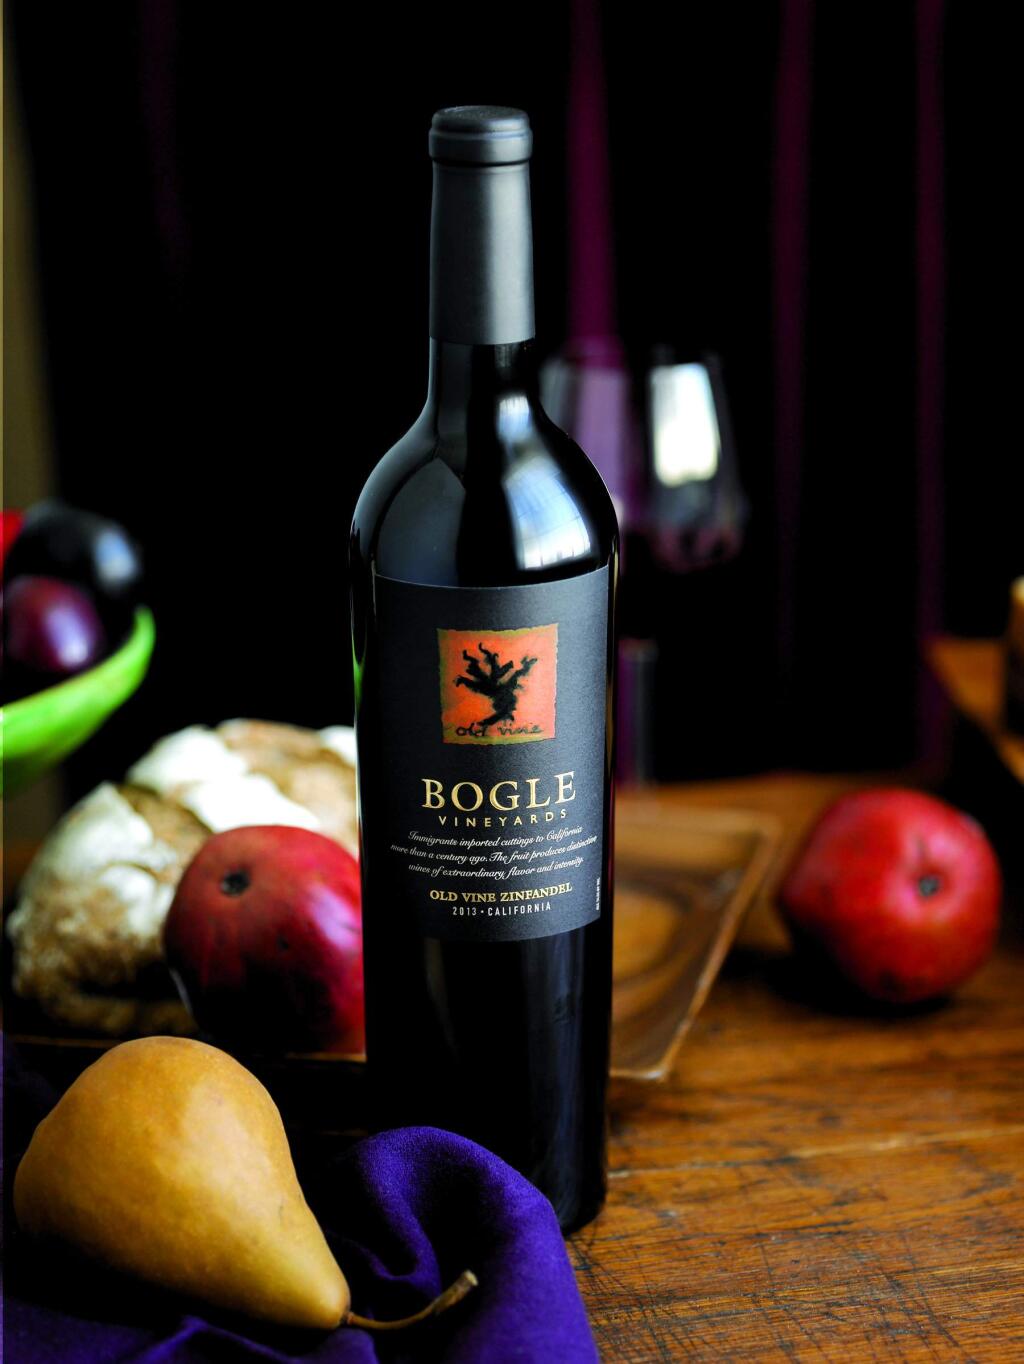 Bogle VineyardsA zinfandel with roaring red fruit -- pomegranate and raspberry -- is the clear winner of the Press Democrat's Hamburger Reds wine tasting. The Bogle Vineyards, 2013 California Old Vine Zinfandel at $11 was the standout, the tangy zin that could stand up to a burger, even an exotic one.